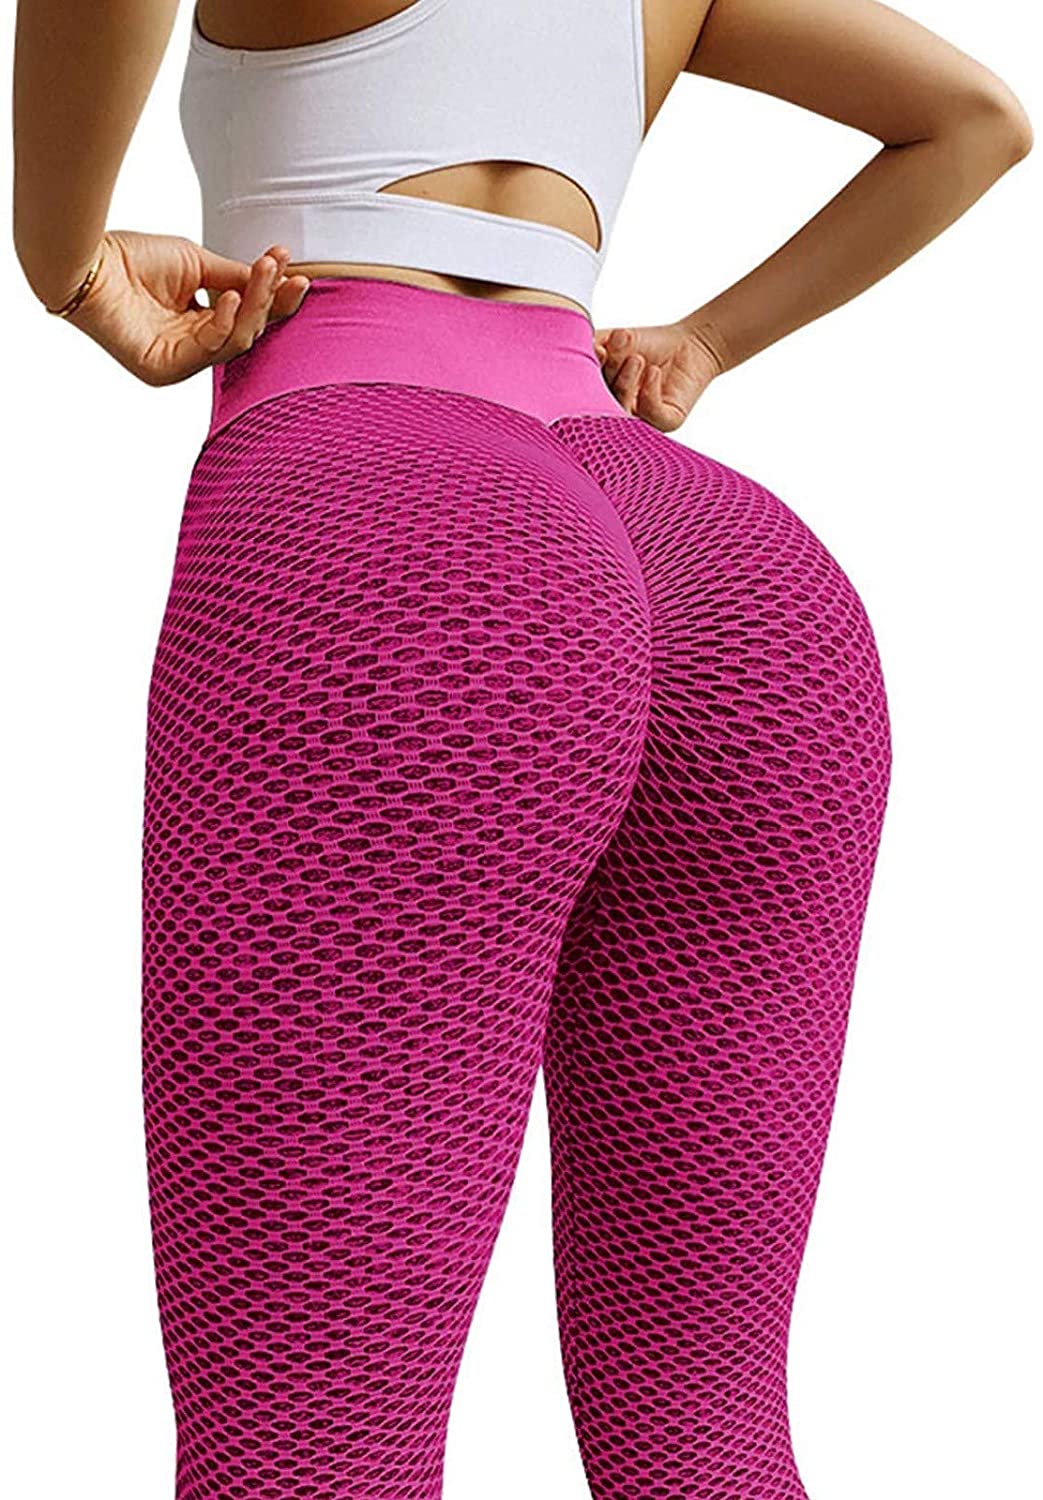 YWDJ Tights for Women High Waist Butt Lifting Casual Yogalicious